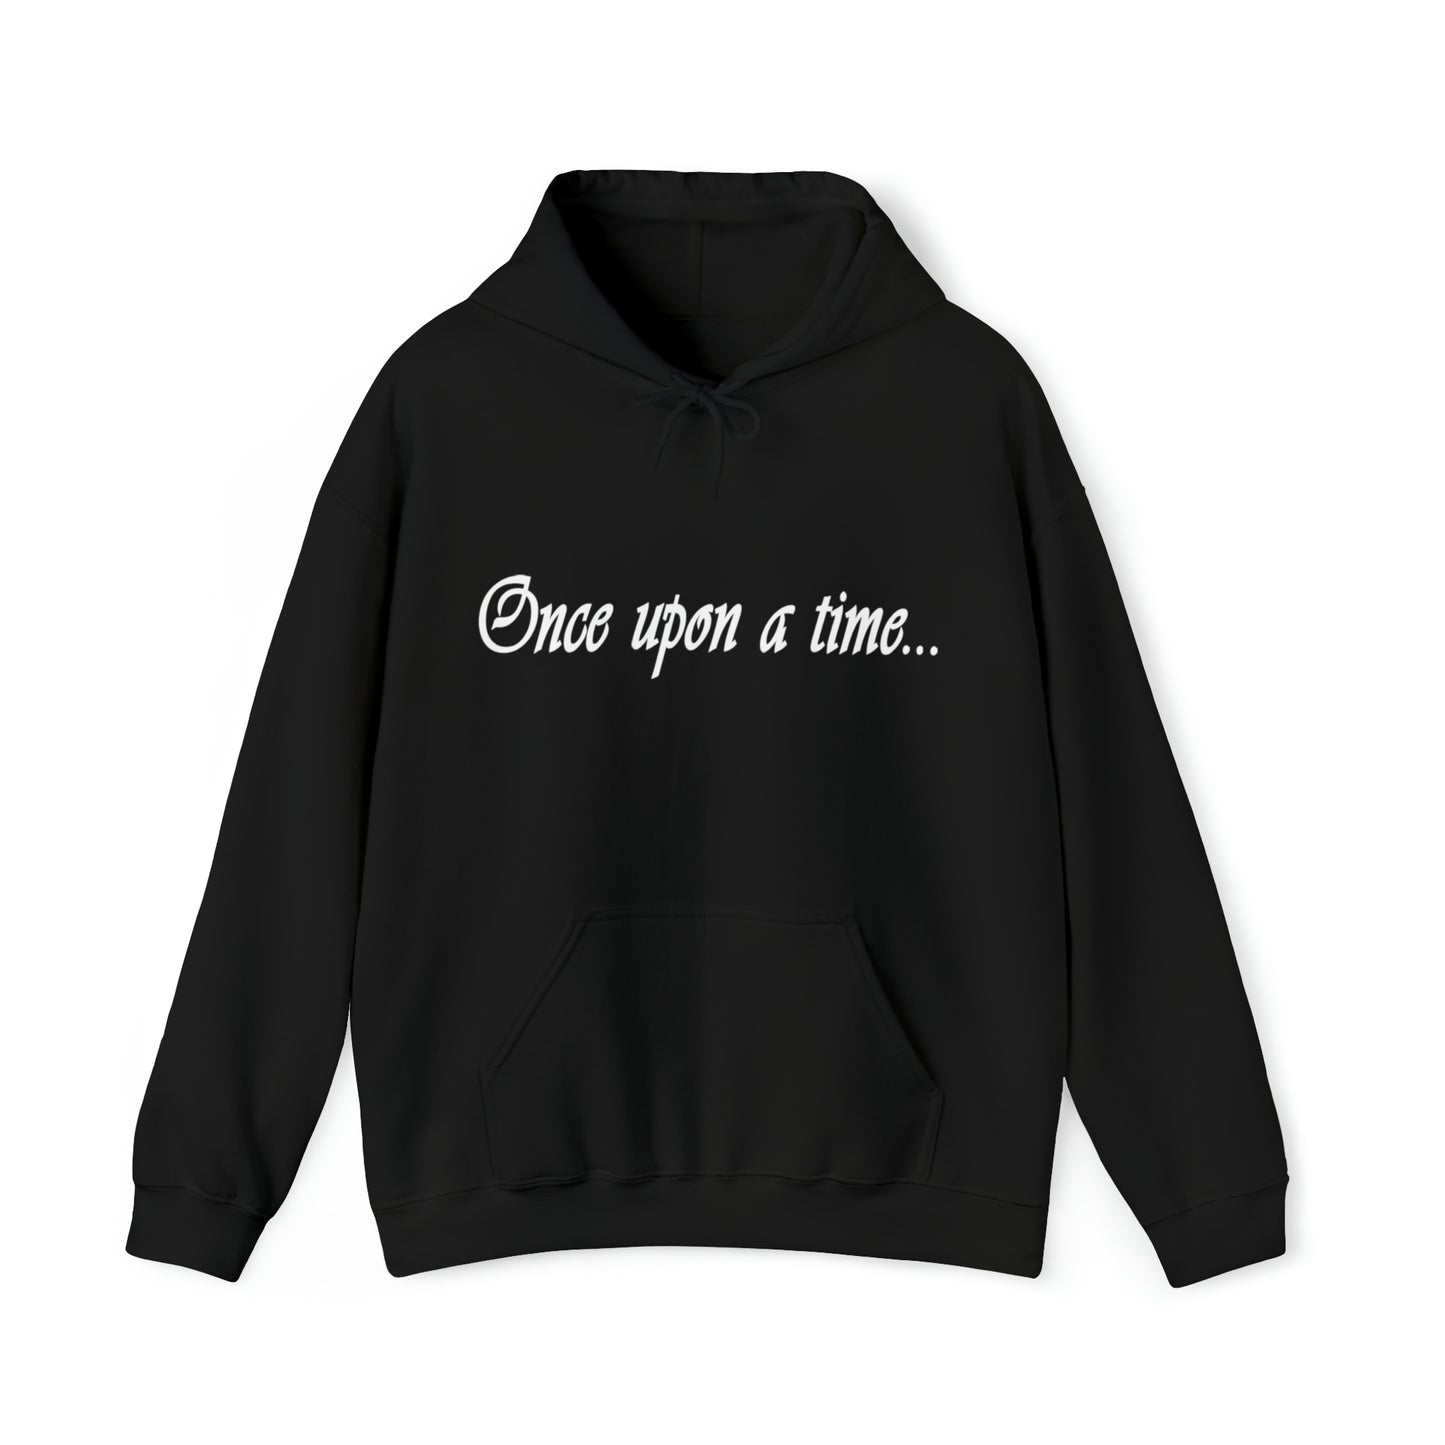 Once Upon A Time - Unisex Heavy Blend™ Hooded Sweatshirt